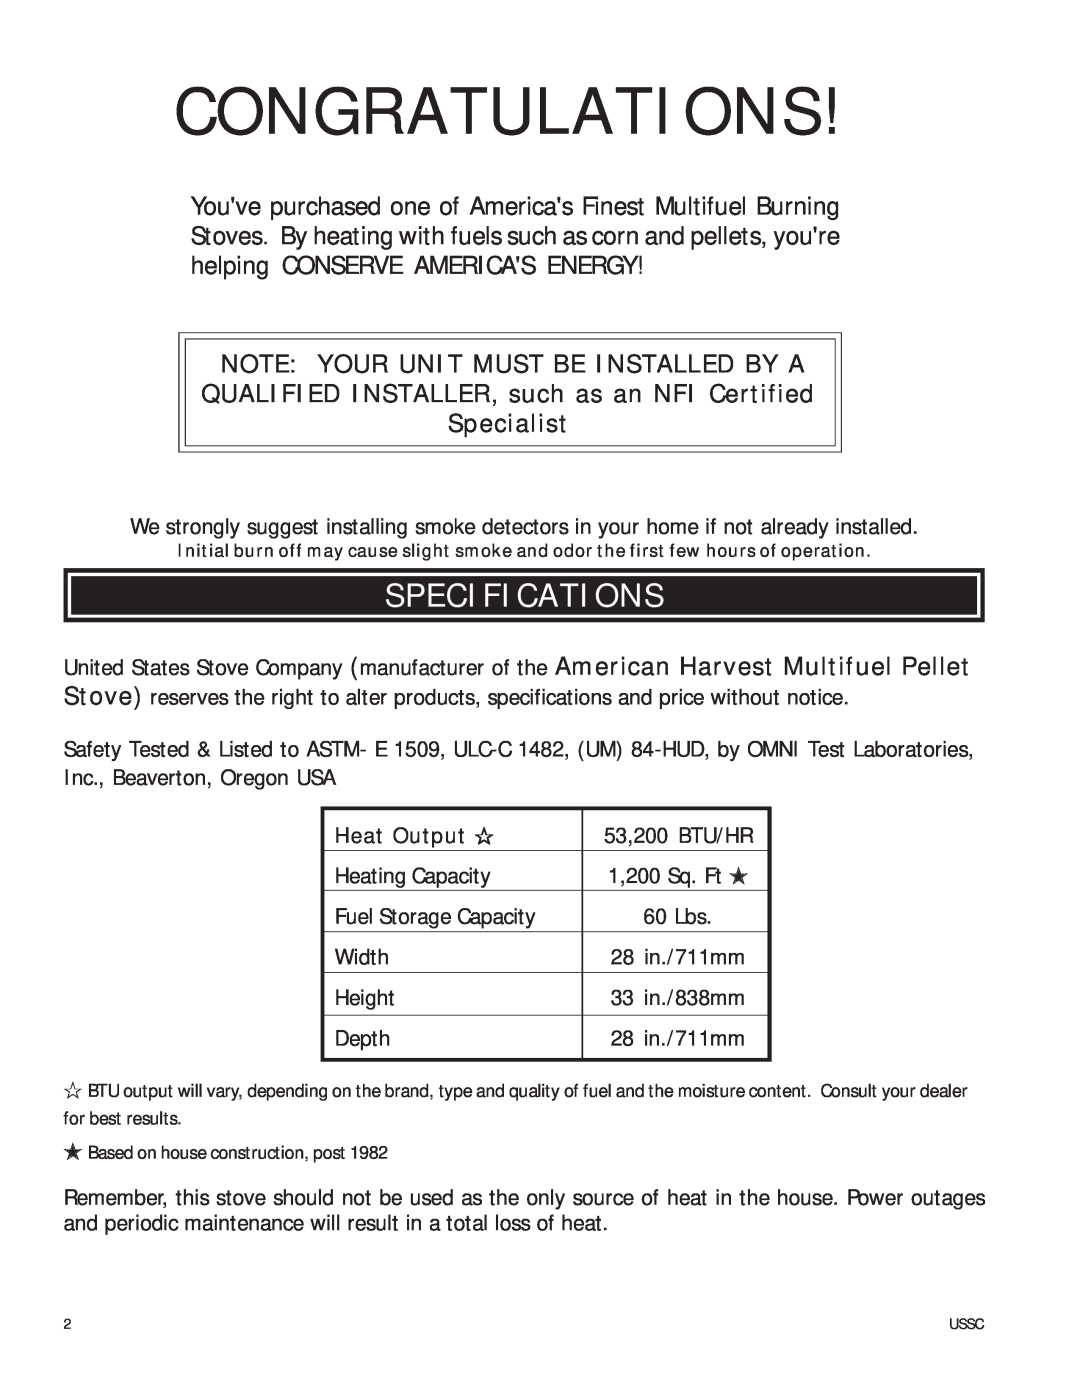 United States Stove 6037 owner manual Specifications, Note Your Unit Must Be Installed By A, Congratulations, Heat Output 